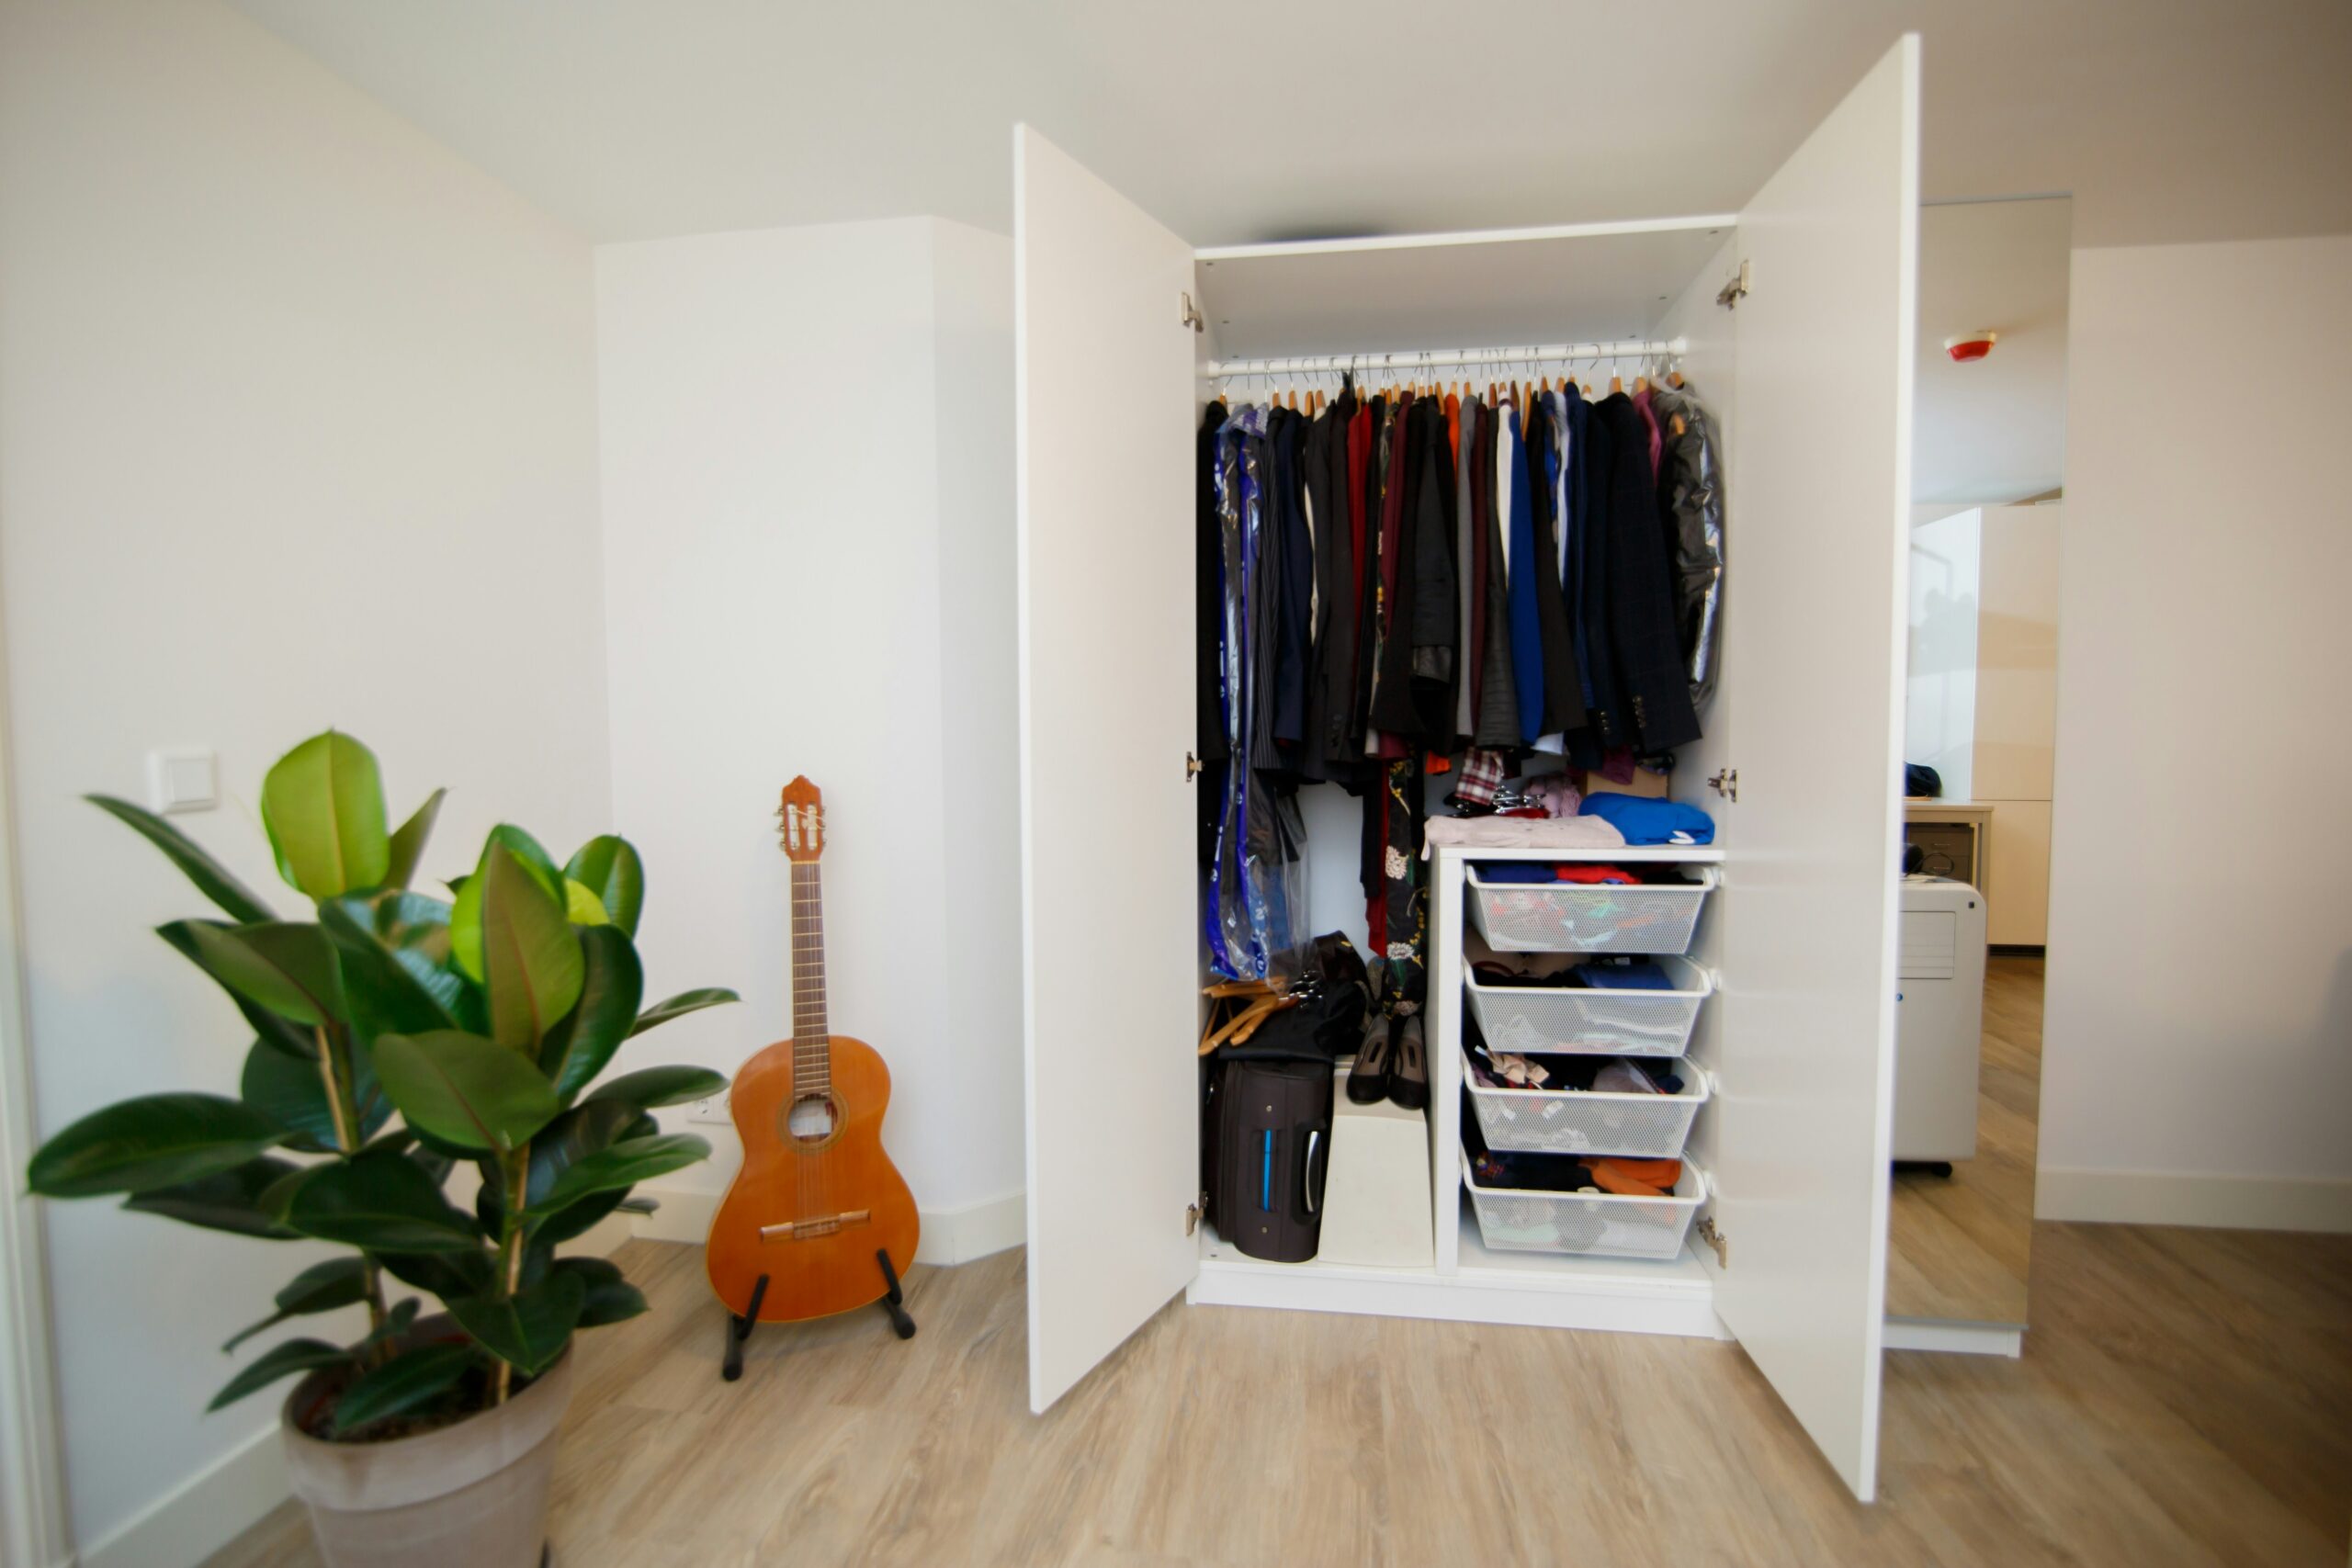 explore our wide selection of premium closet solutions for a beautifully organized space. find the perfect storage solutions for your home at our store.